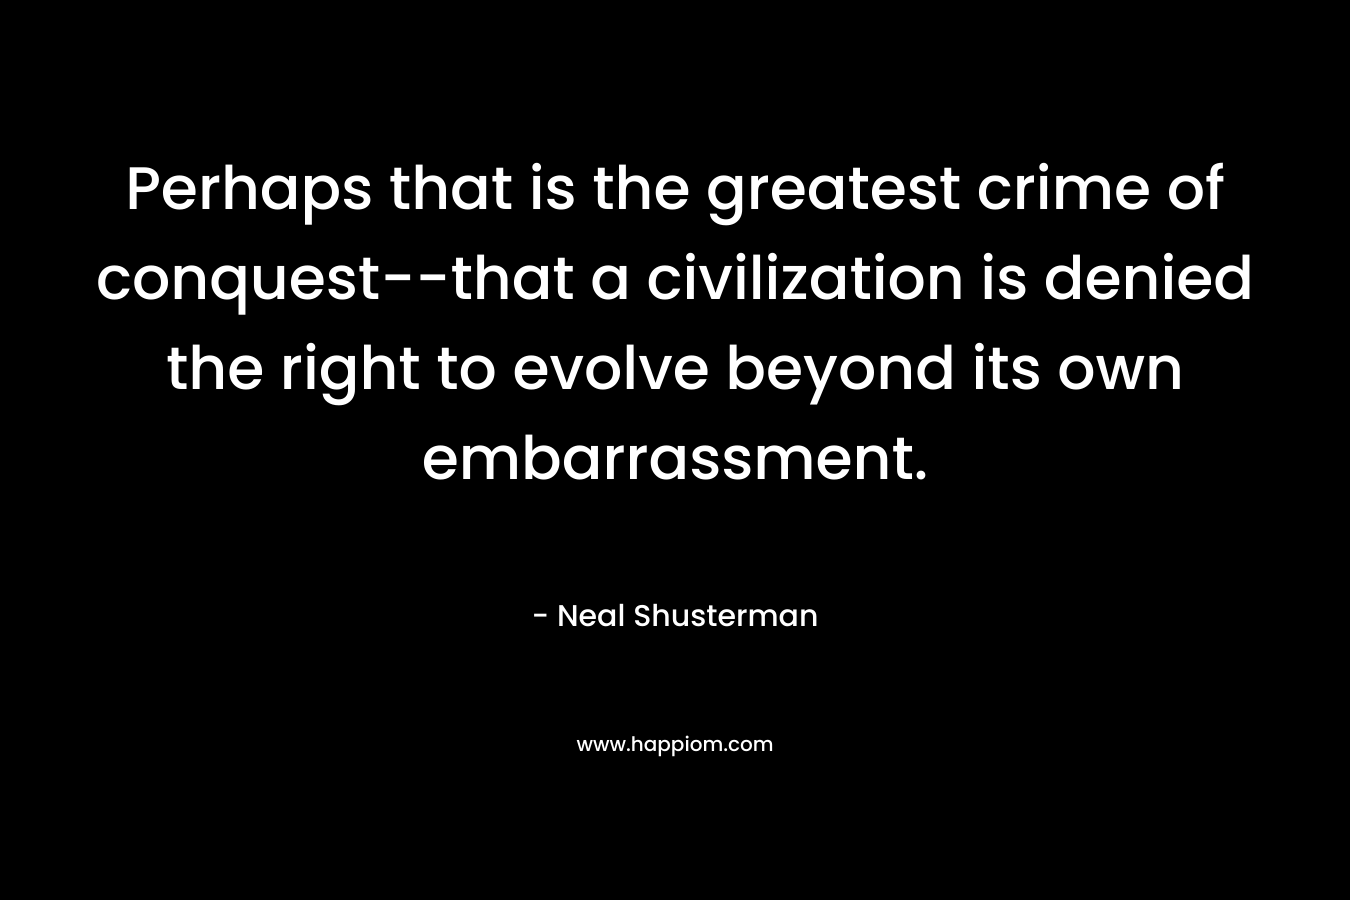 Perhaps that is the greatest crime of conquest--that a civilization is denied the right to evolve beyond its own embarrassment.